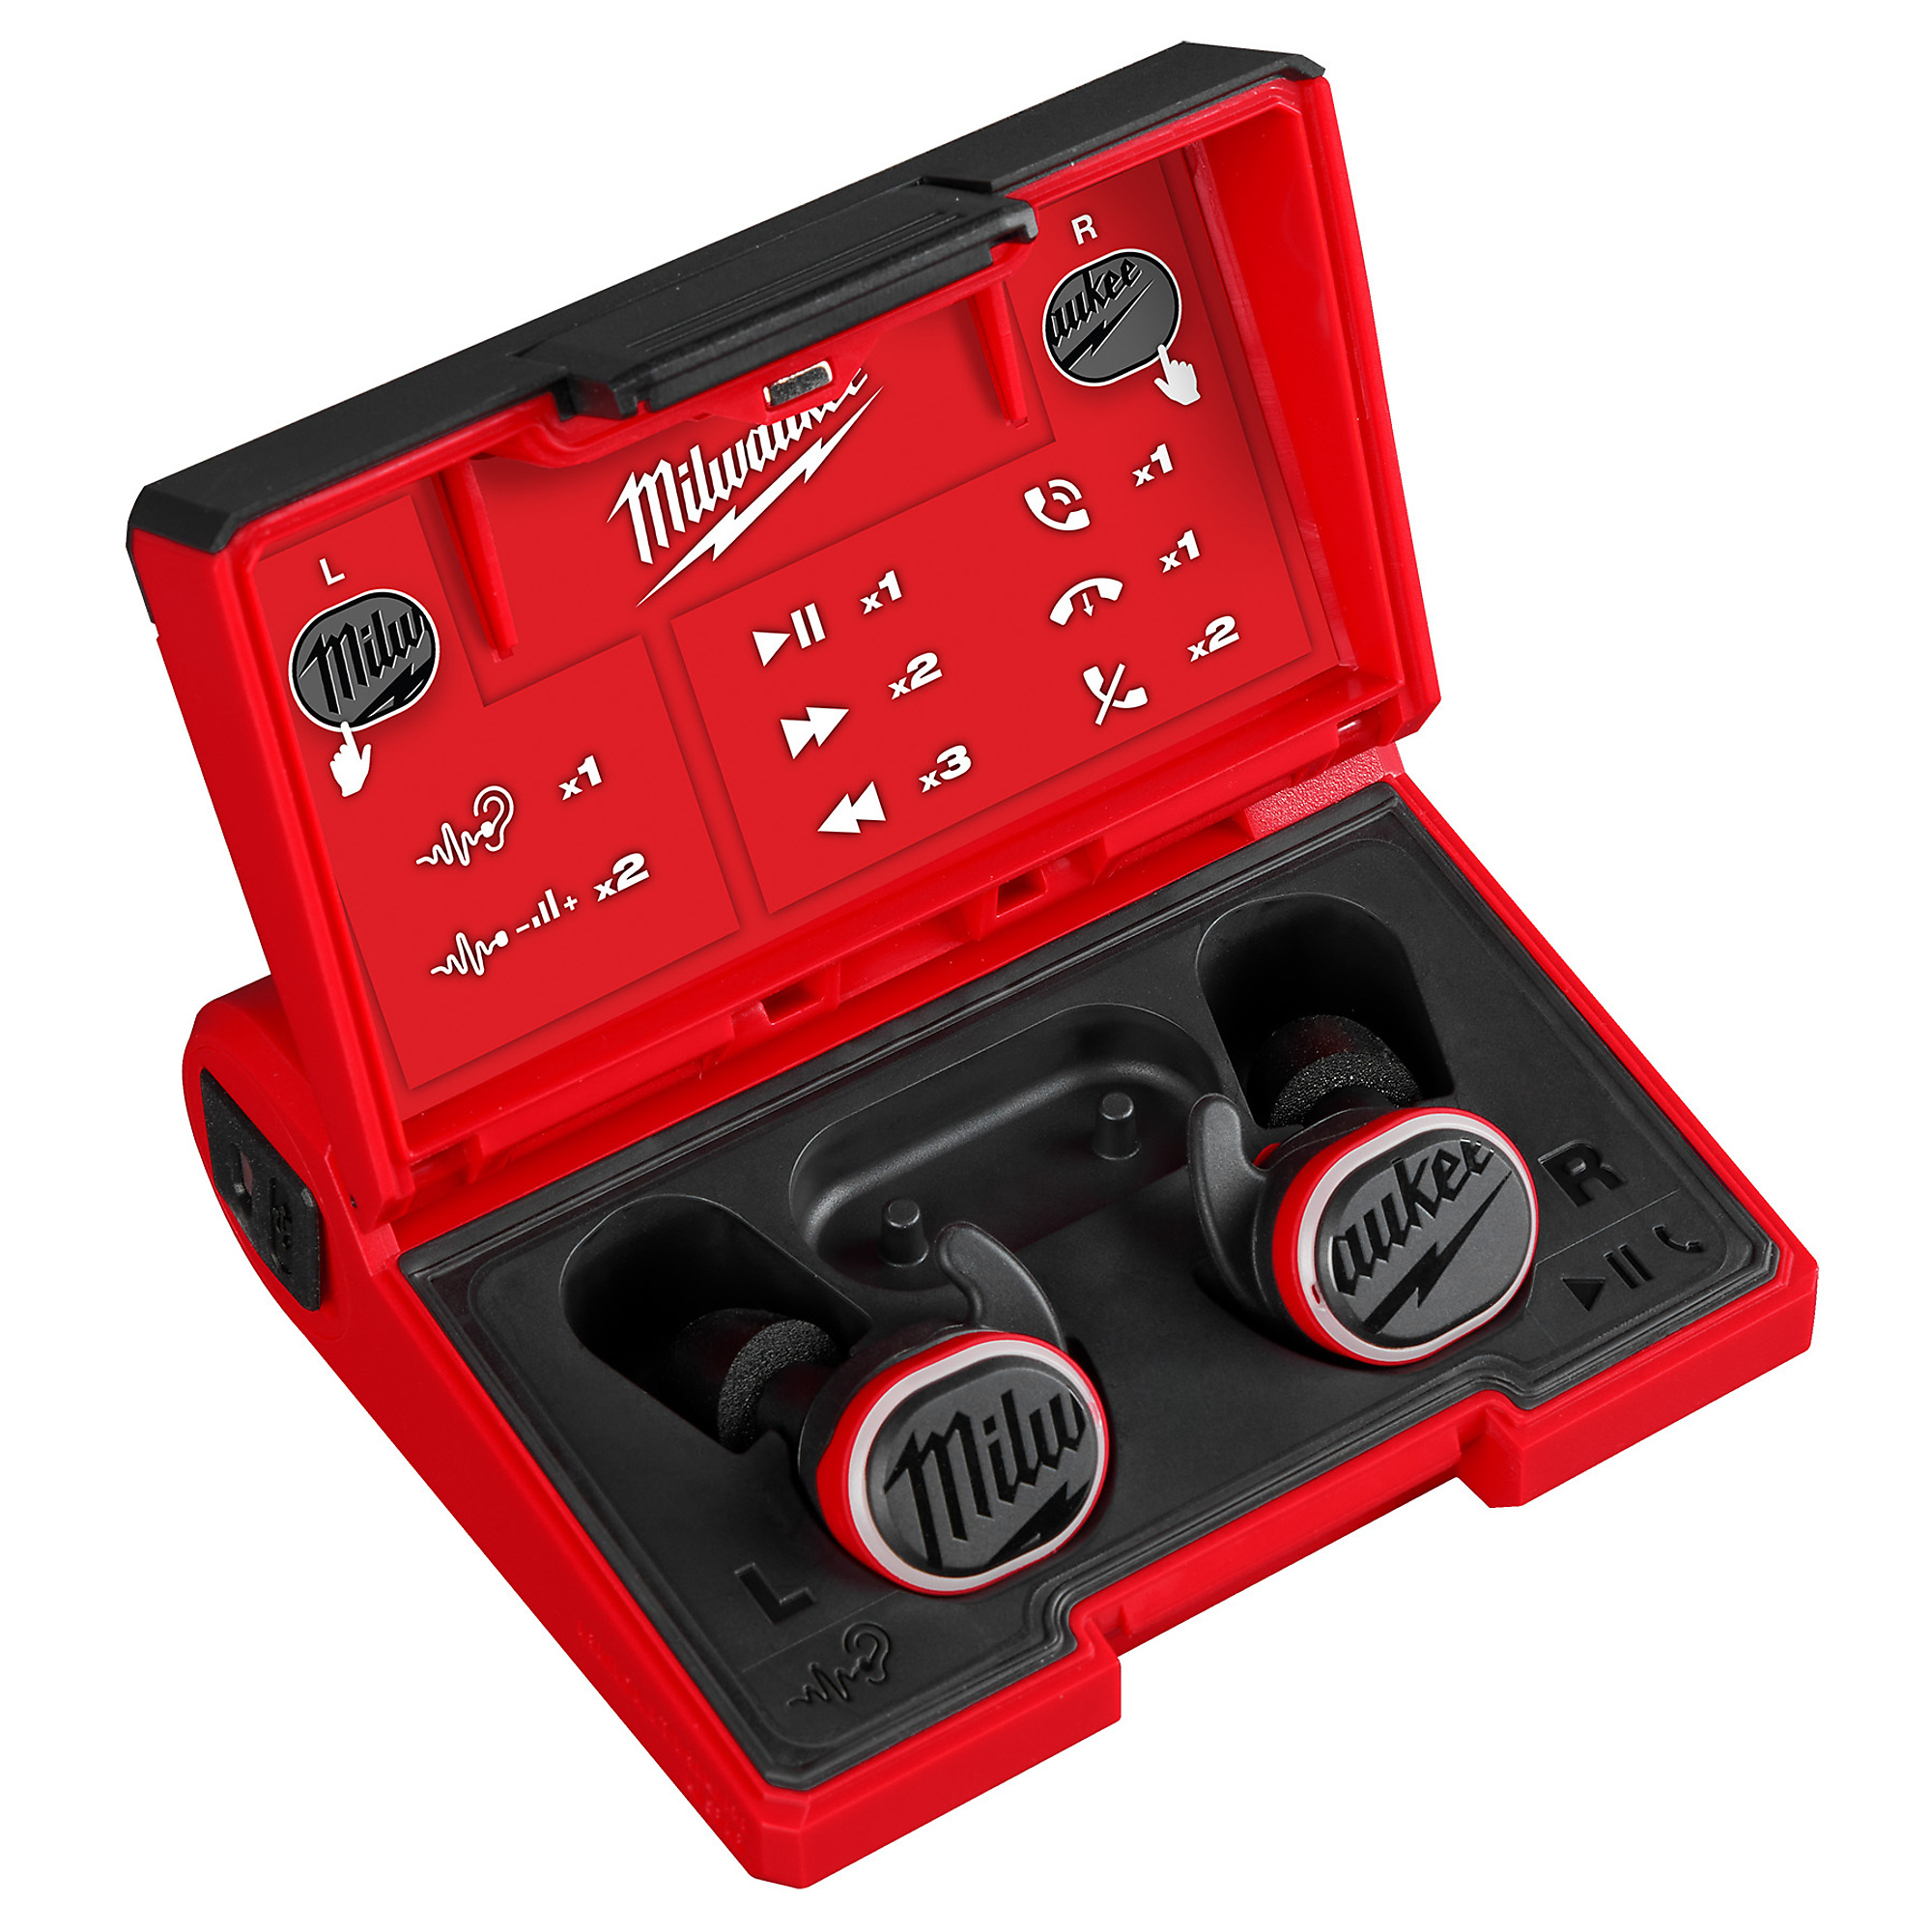 Milwaukee REDLITHIUM USB Bluetooth , REDLITHIUM USB Bluetooth Jobsite Ear Buds, Noise Reduction Rating 9 dB, Pairs Included (qty.) 1 Electronic, Model